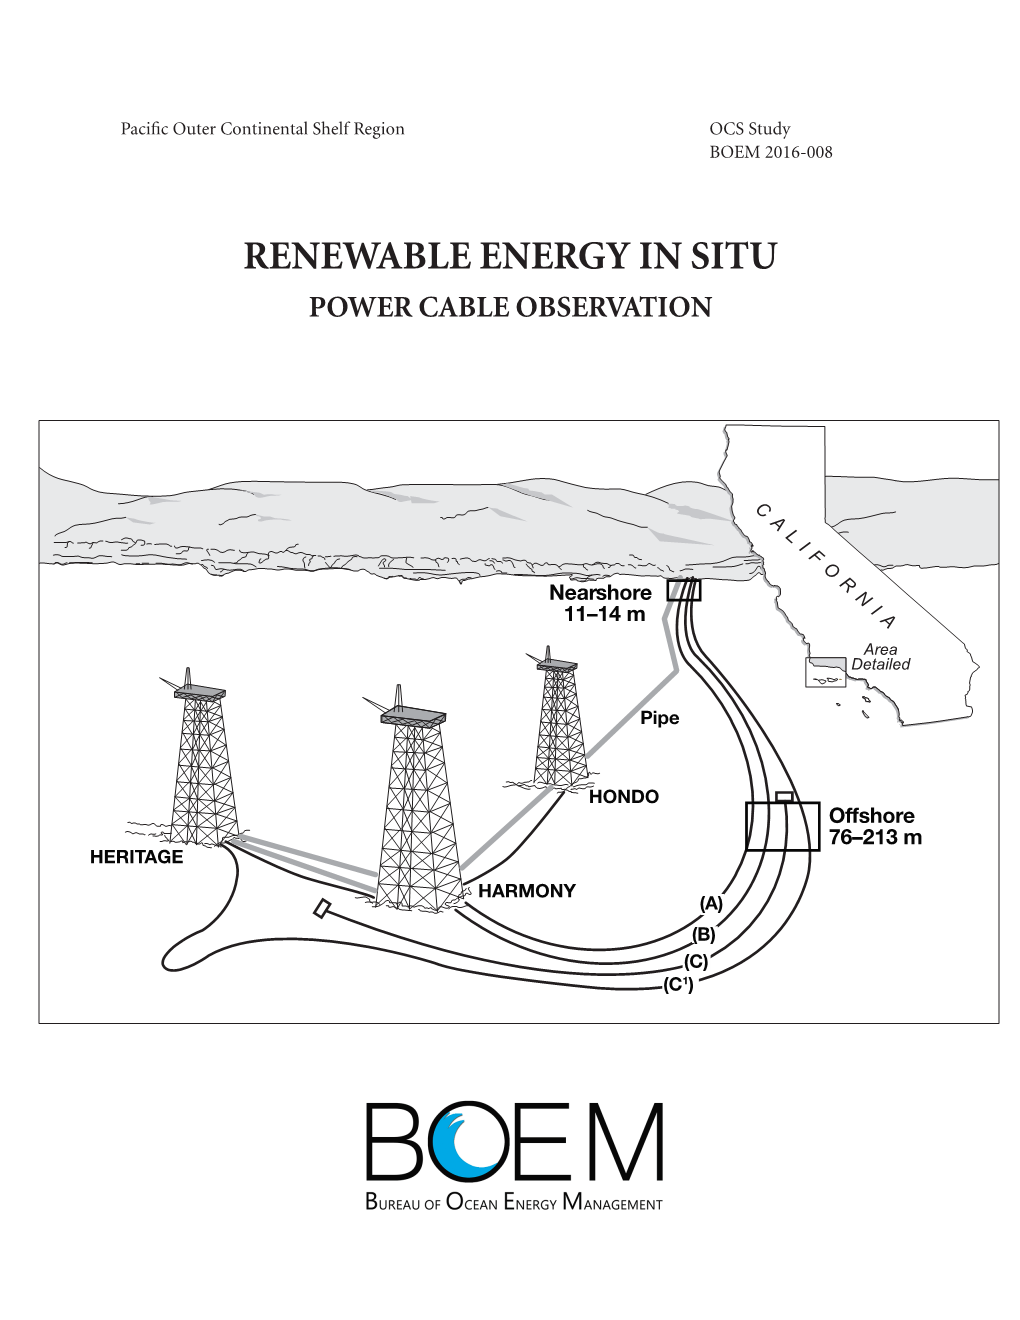 Renewable Energy in Situ Power Cable Observation